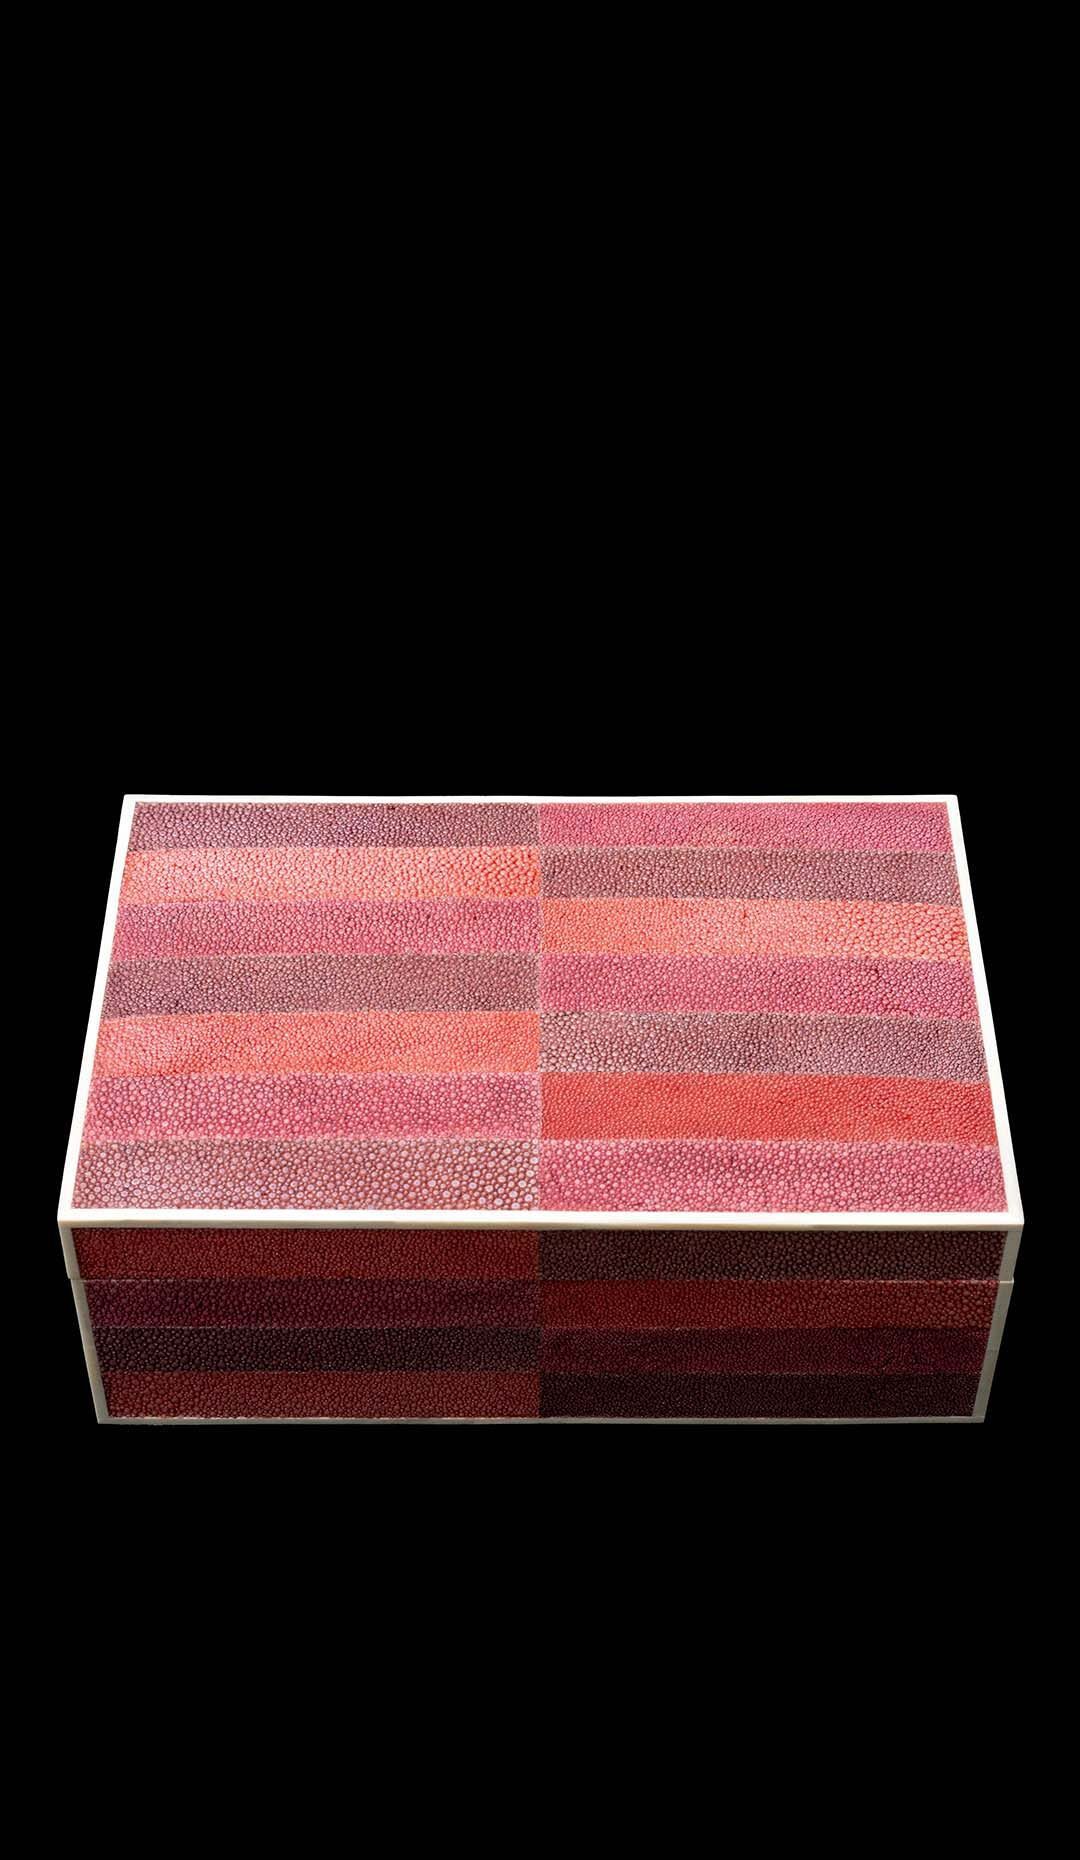 Red & pink shagreen box